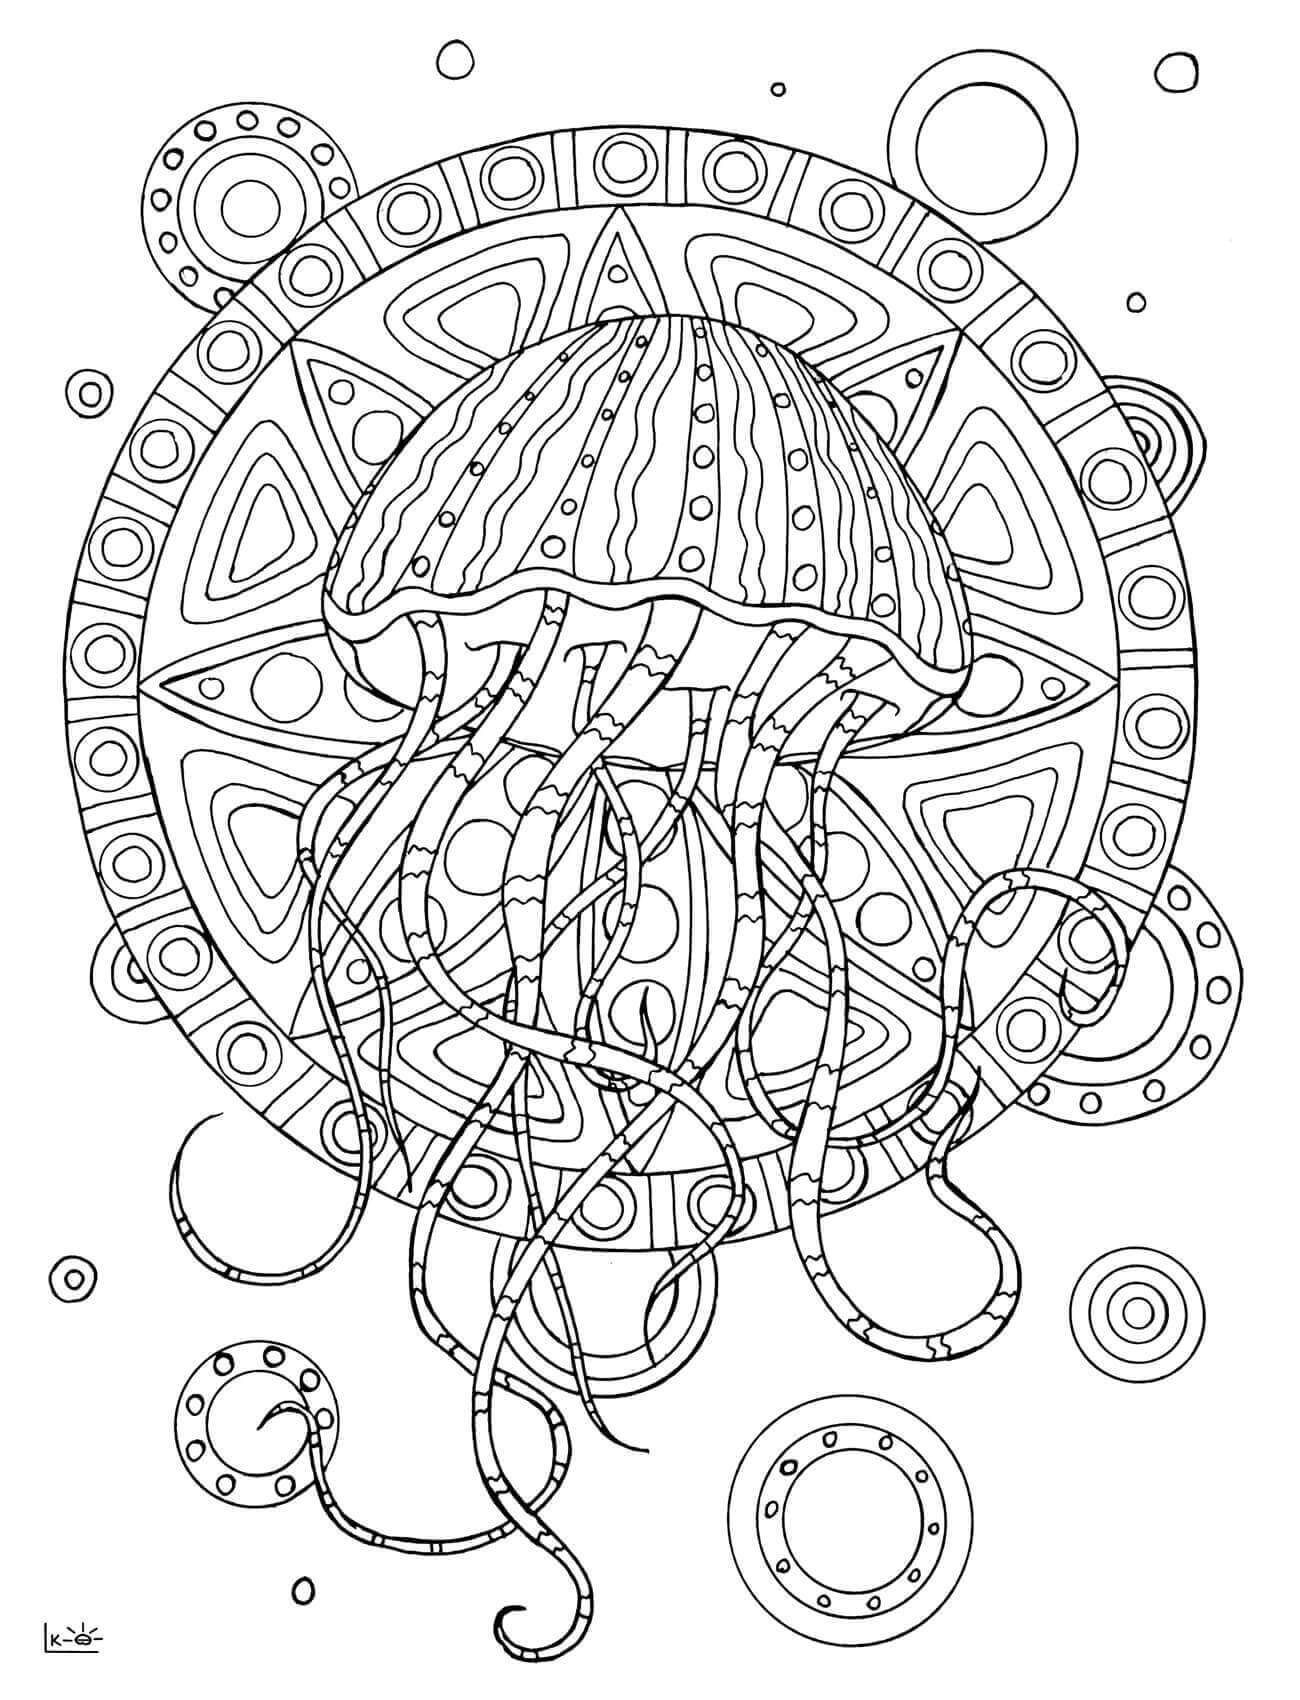 195 Jellyfish Coloring Page Designs: Underwater Beauty in Color 183